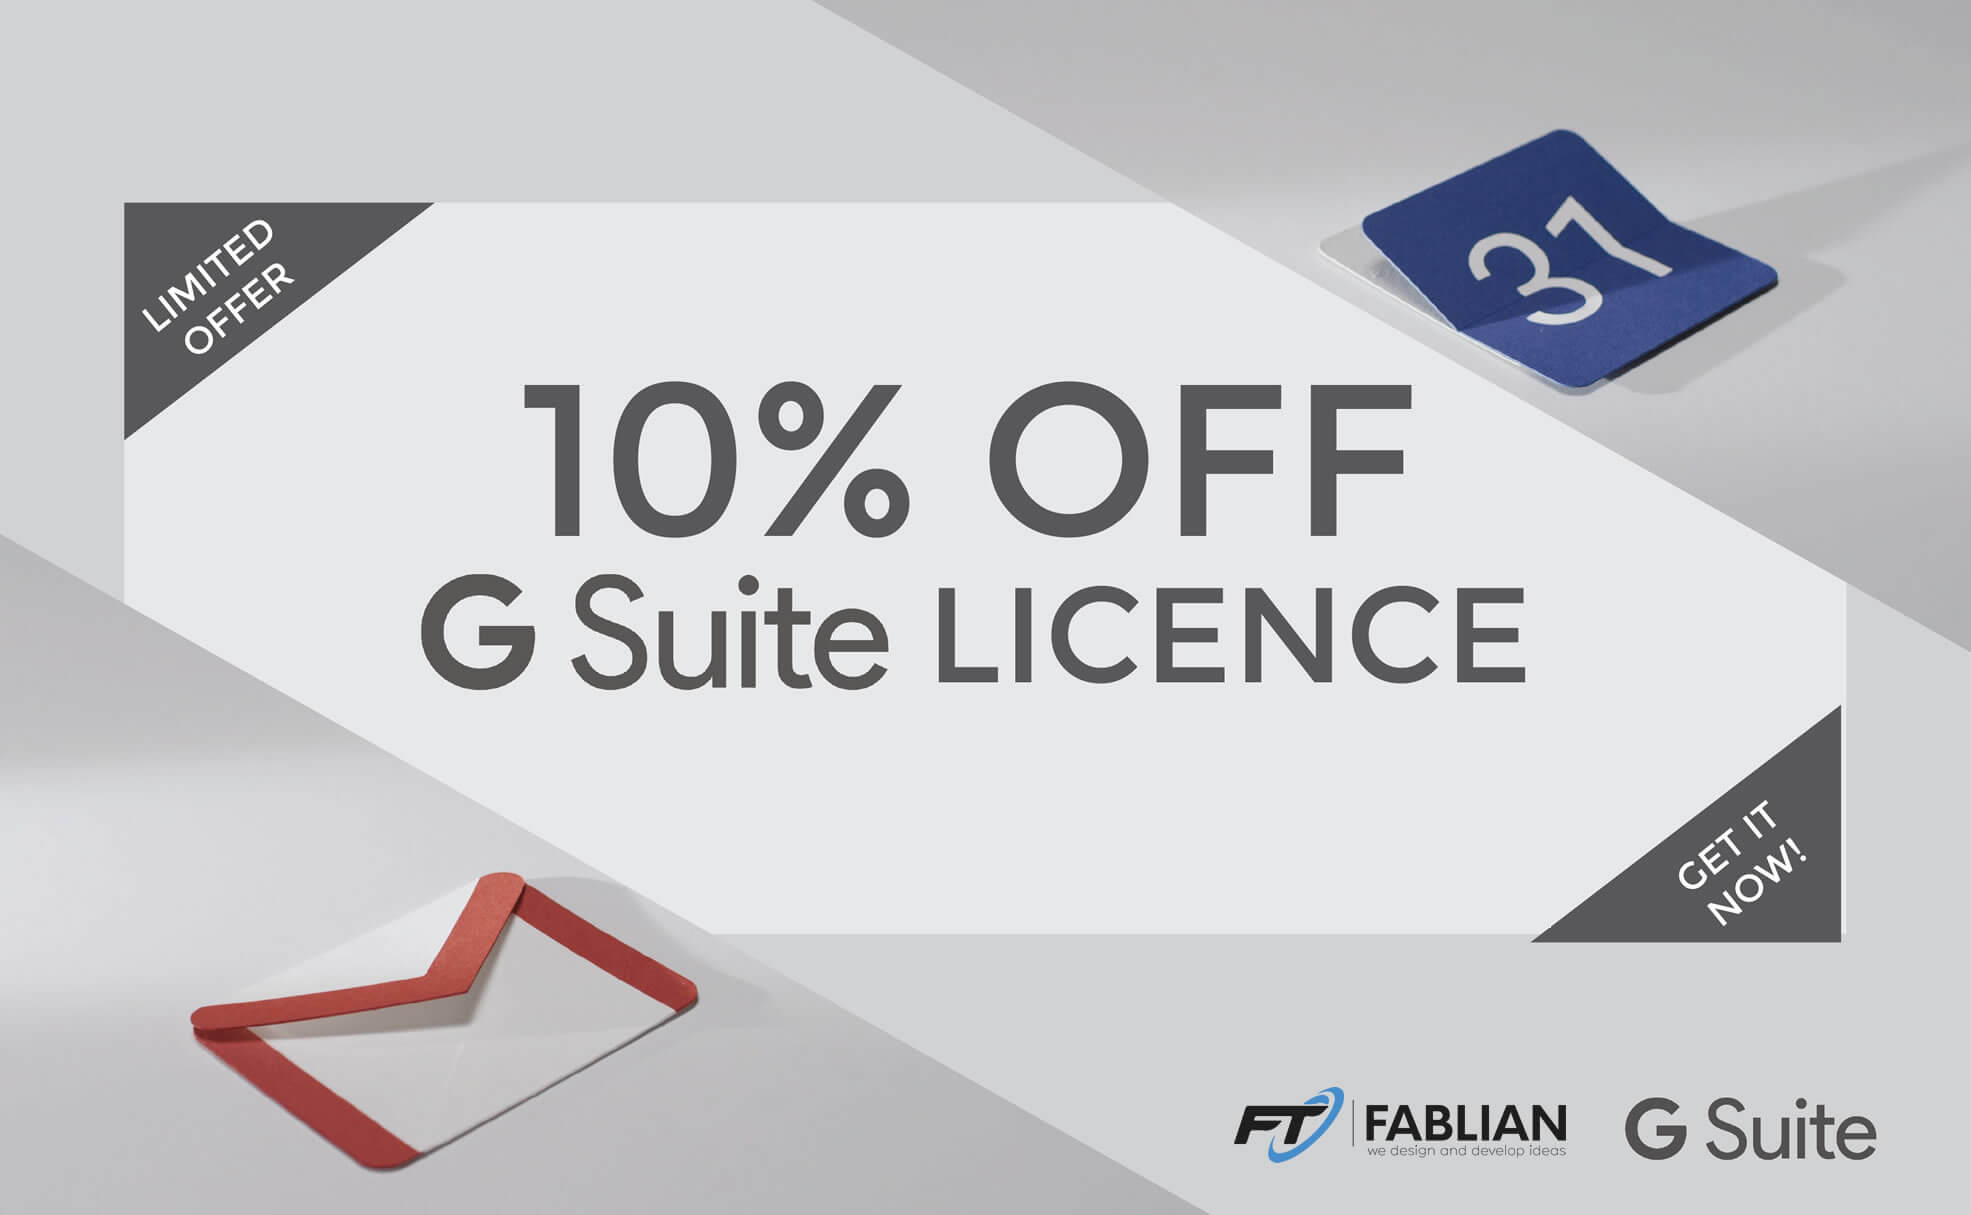 Get G Suite promo code from authorized G Suite Partner